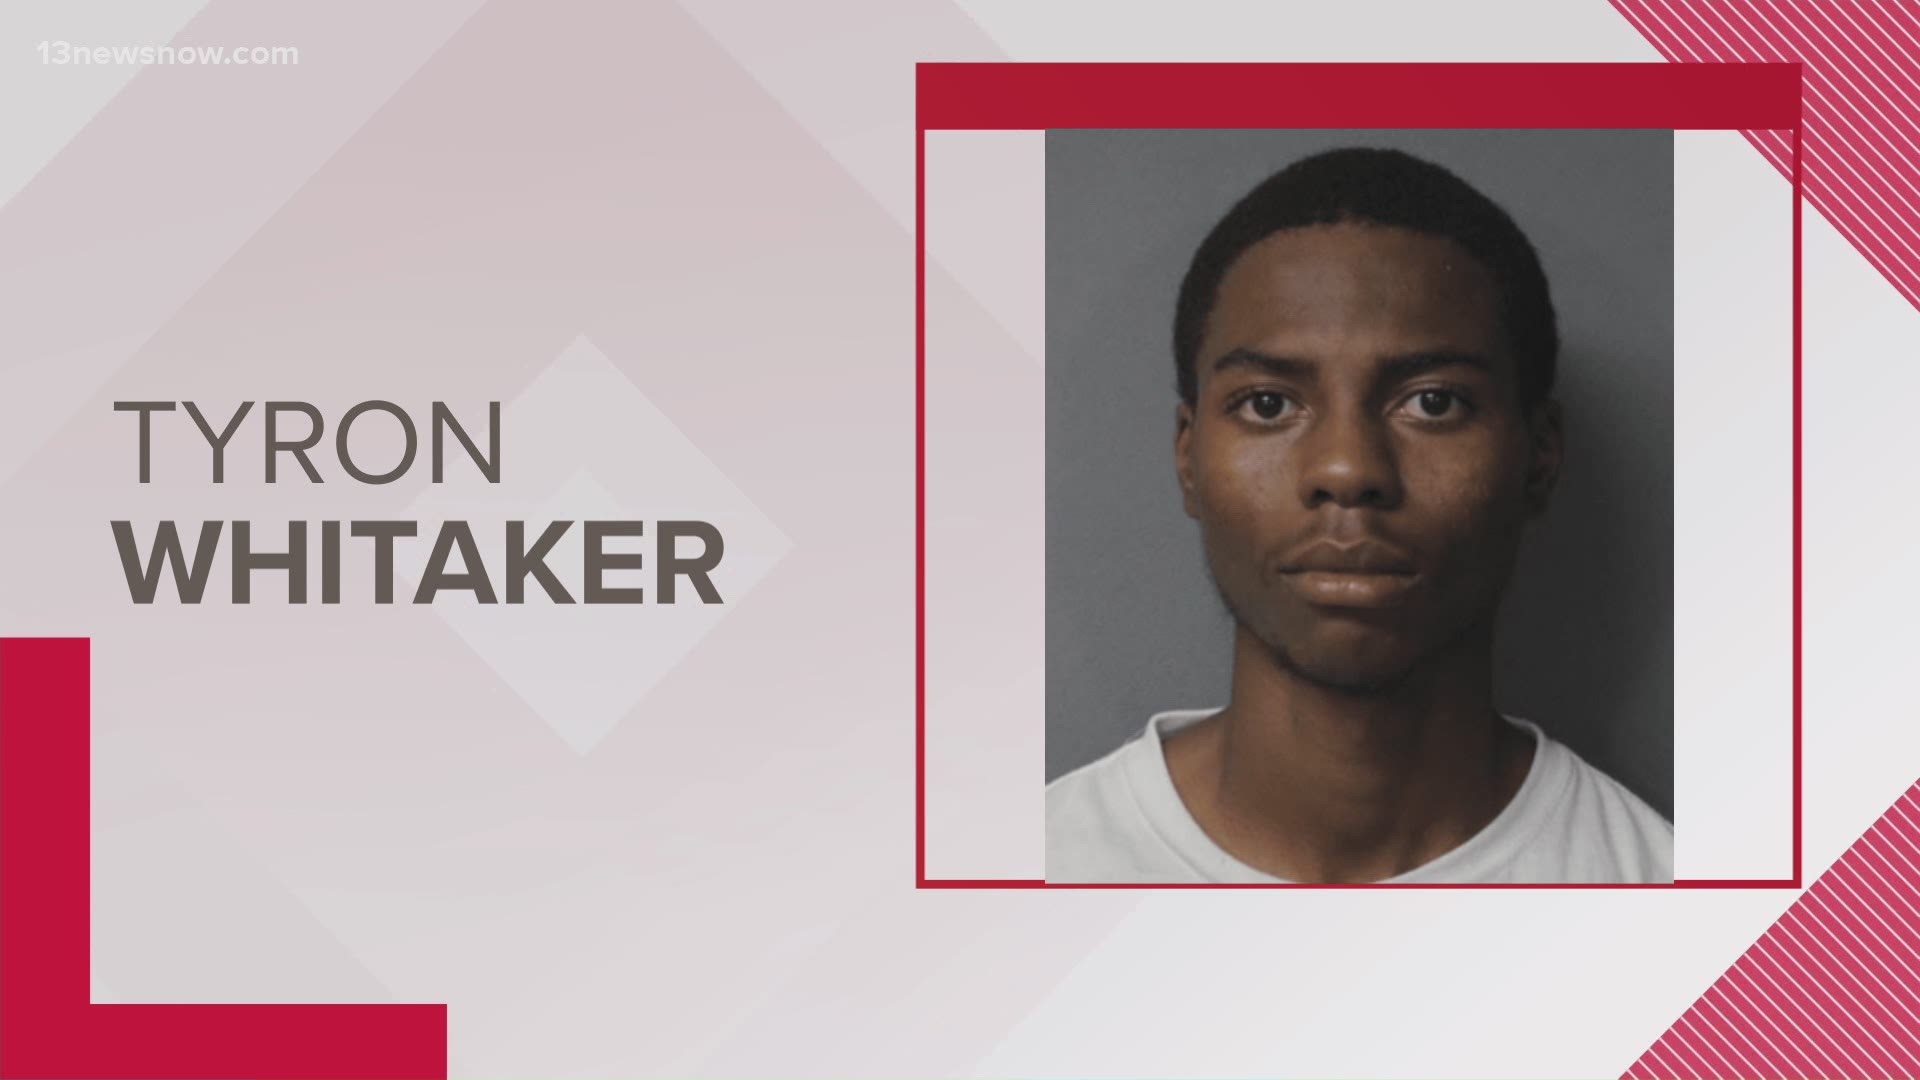 Tyron A. Whitaker, 18, was arrested for second-degree murder and use of a firearm. Police still haven't said what the motive may have been in the case.